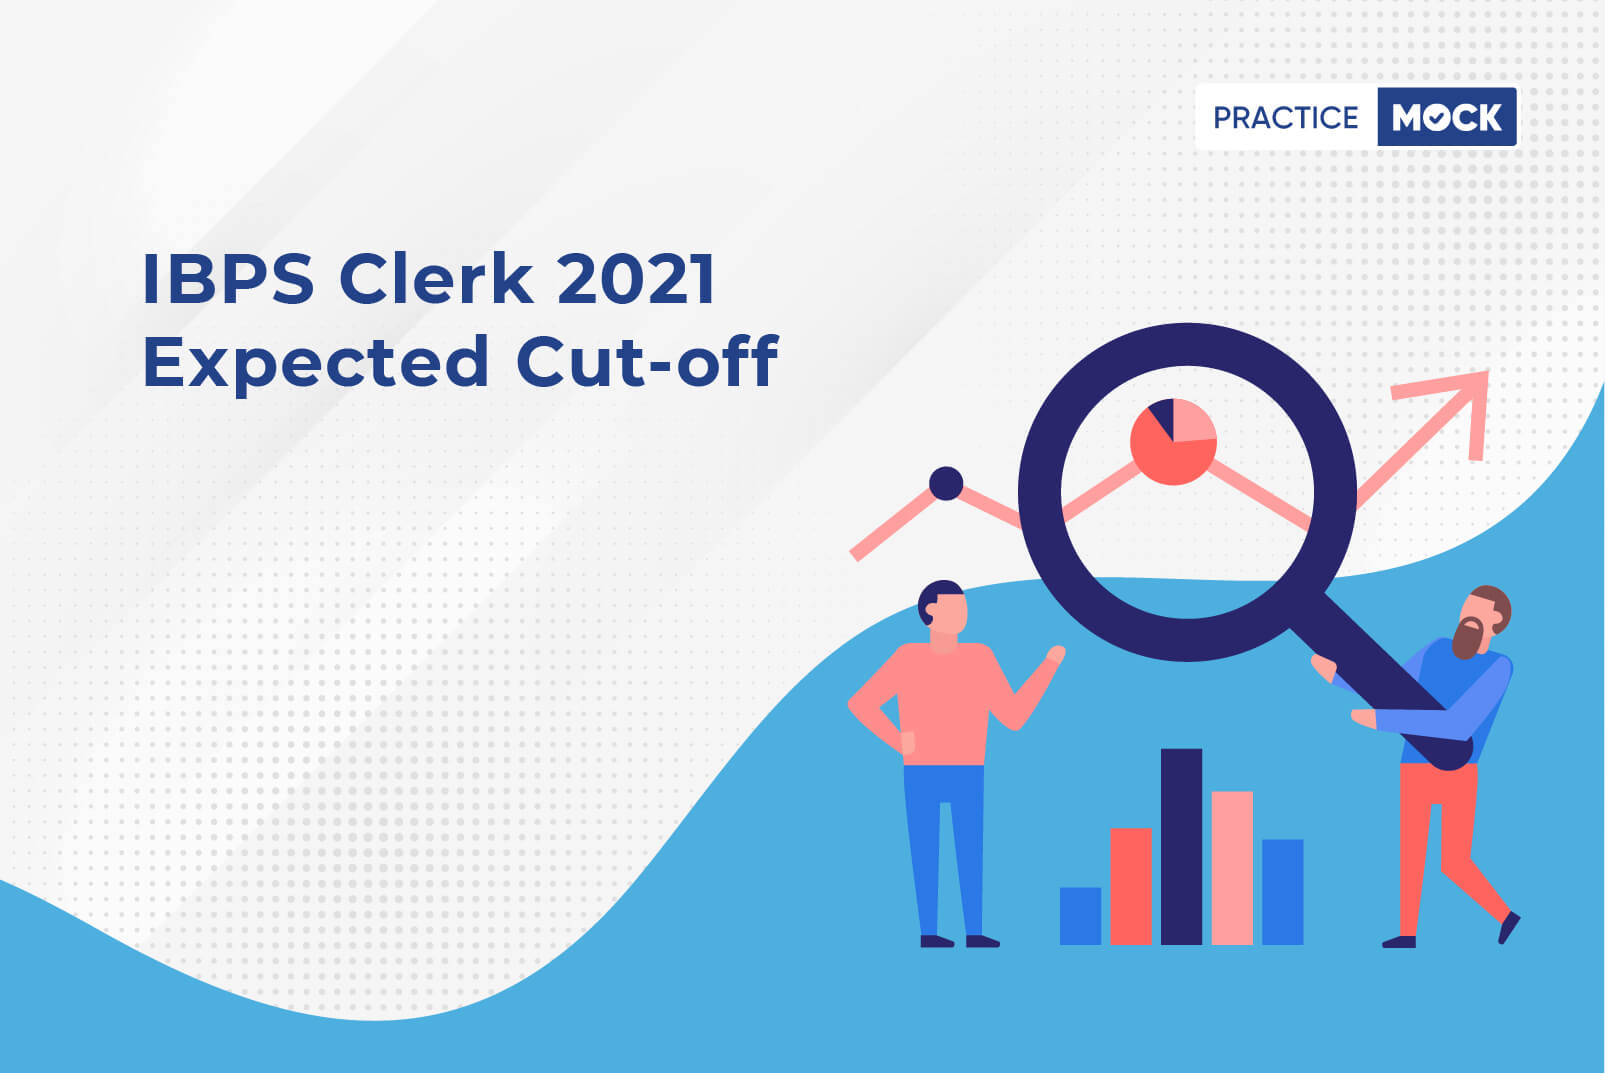 IBPS Clerk Expected Cut-off 2021